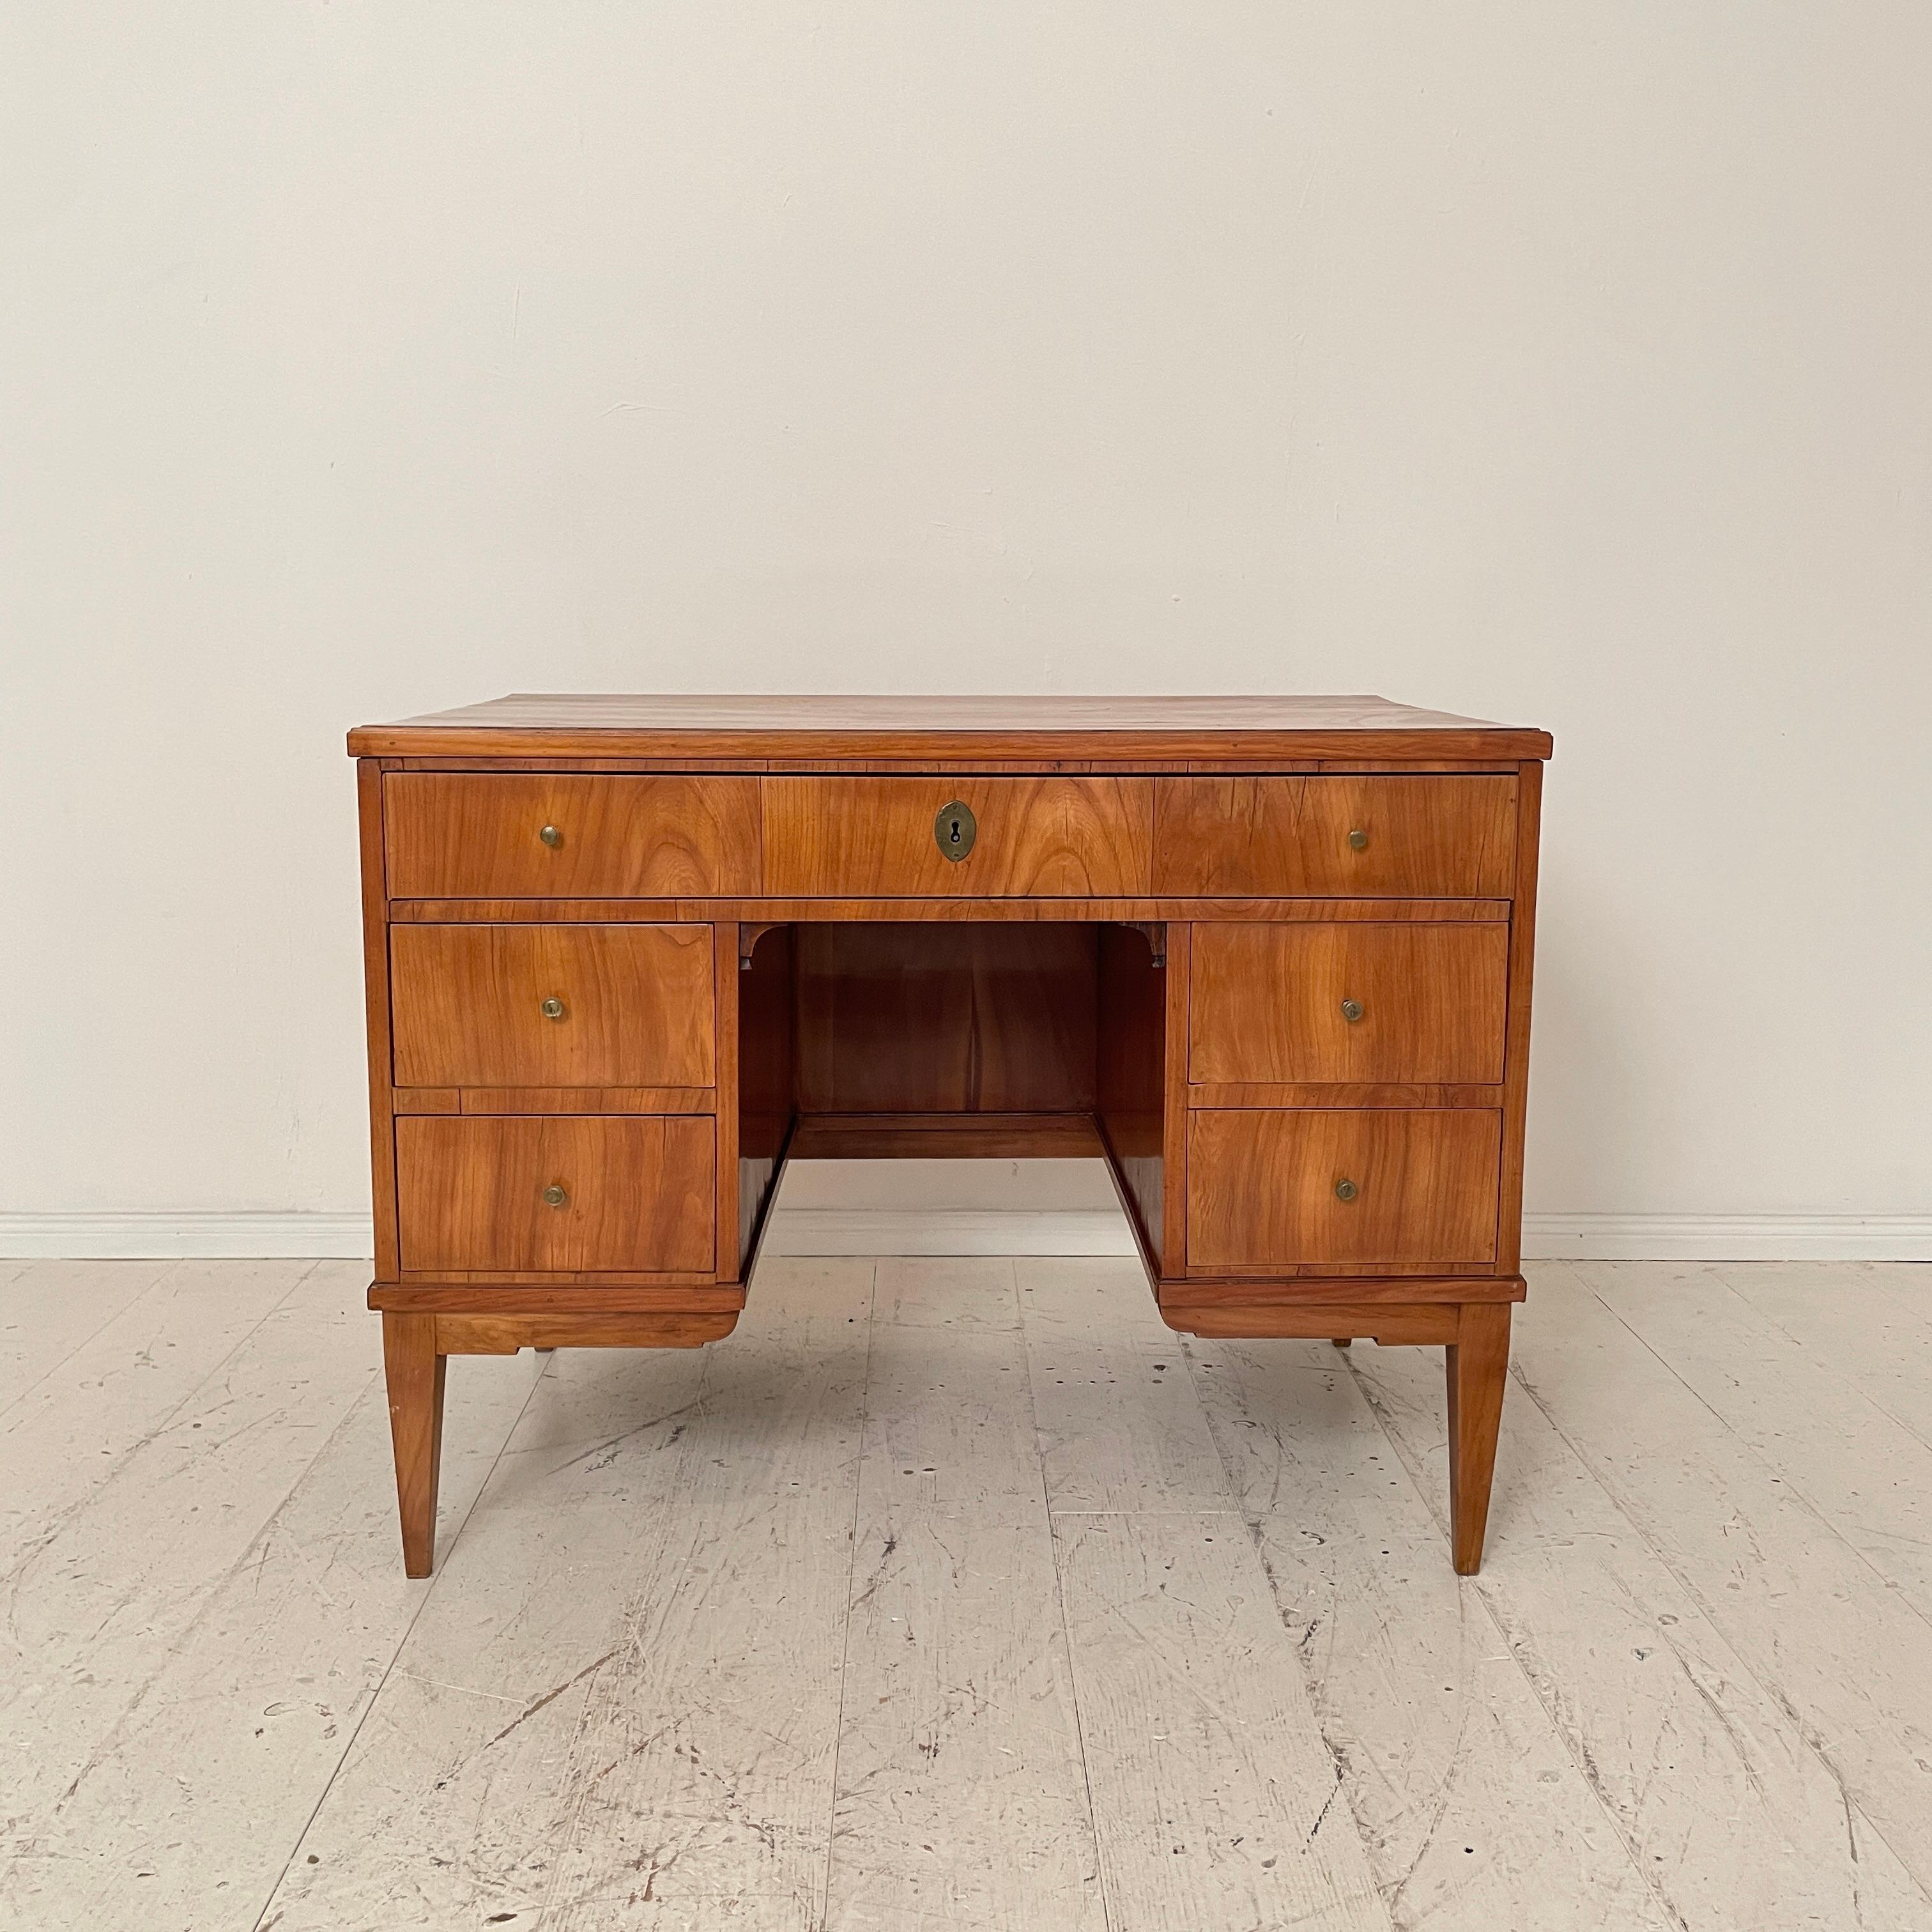 This early 19th century antique Austrian Biedermeier desk or writing table is made out of Pine and is veneered in light brown cherry wood. It was made around 1810.
The piece of furniture is in wonderful original antique condition. It remains the